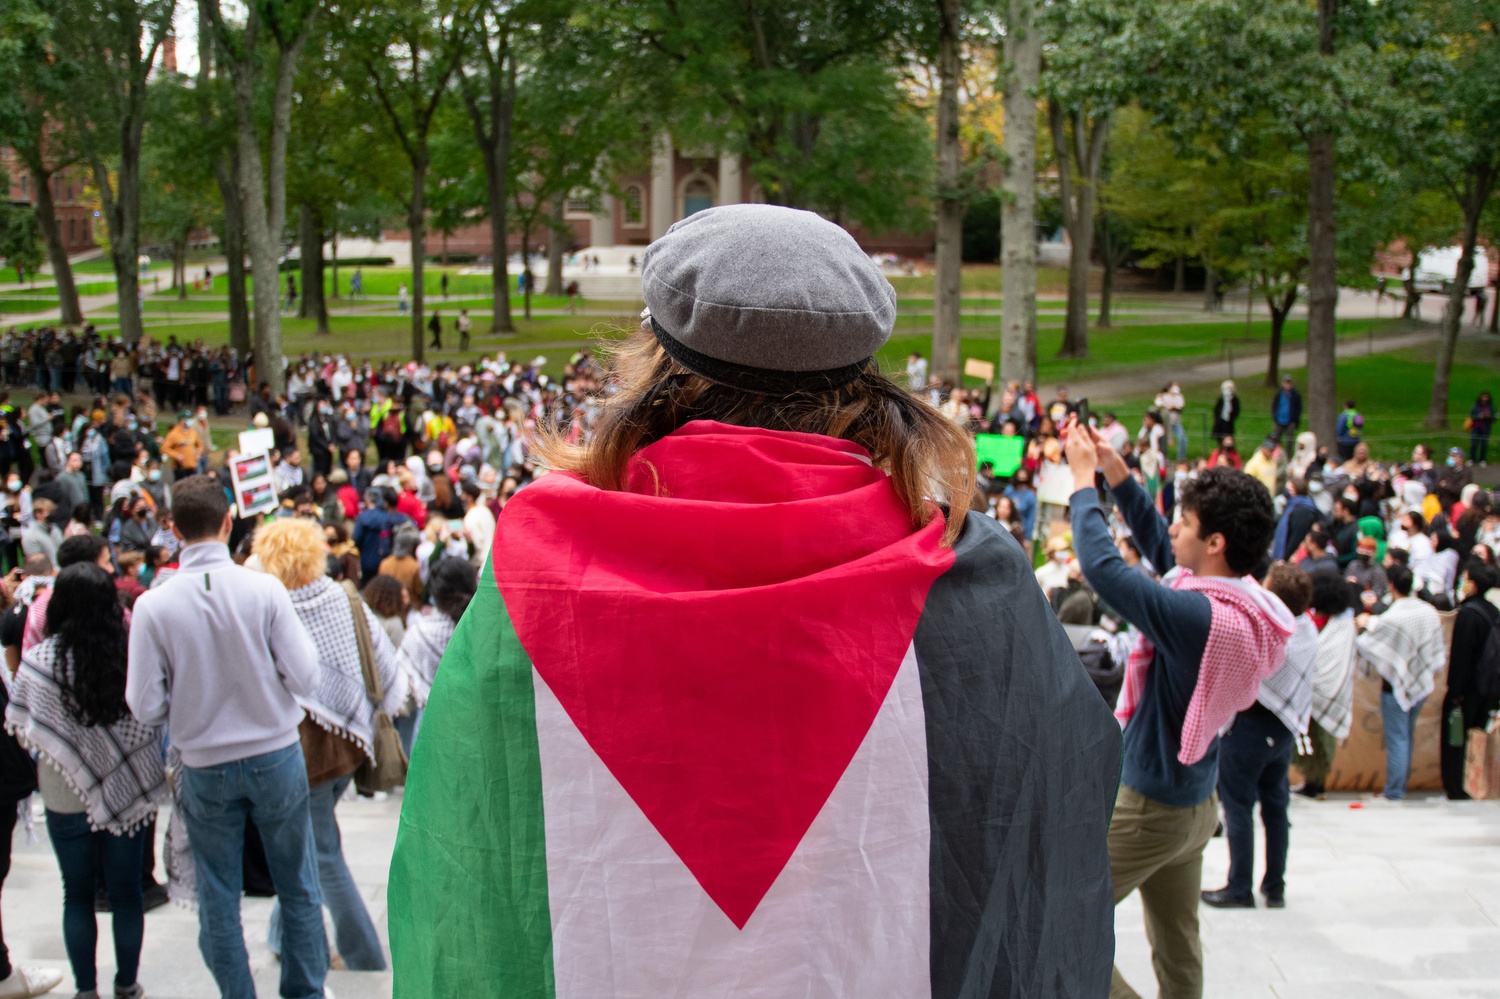 More than 1,000 gather at Harvards University to liberate Palestine ahead of expected Gaza invasion |  News |  Harvard Crimson